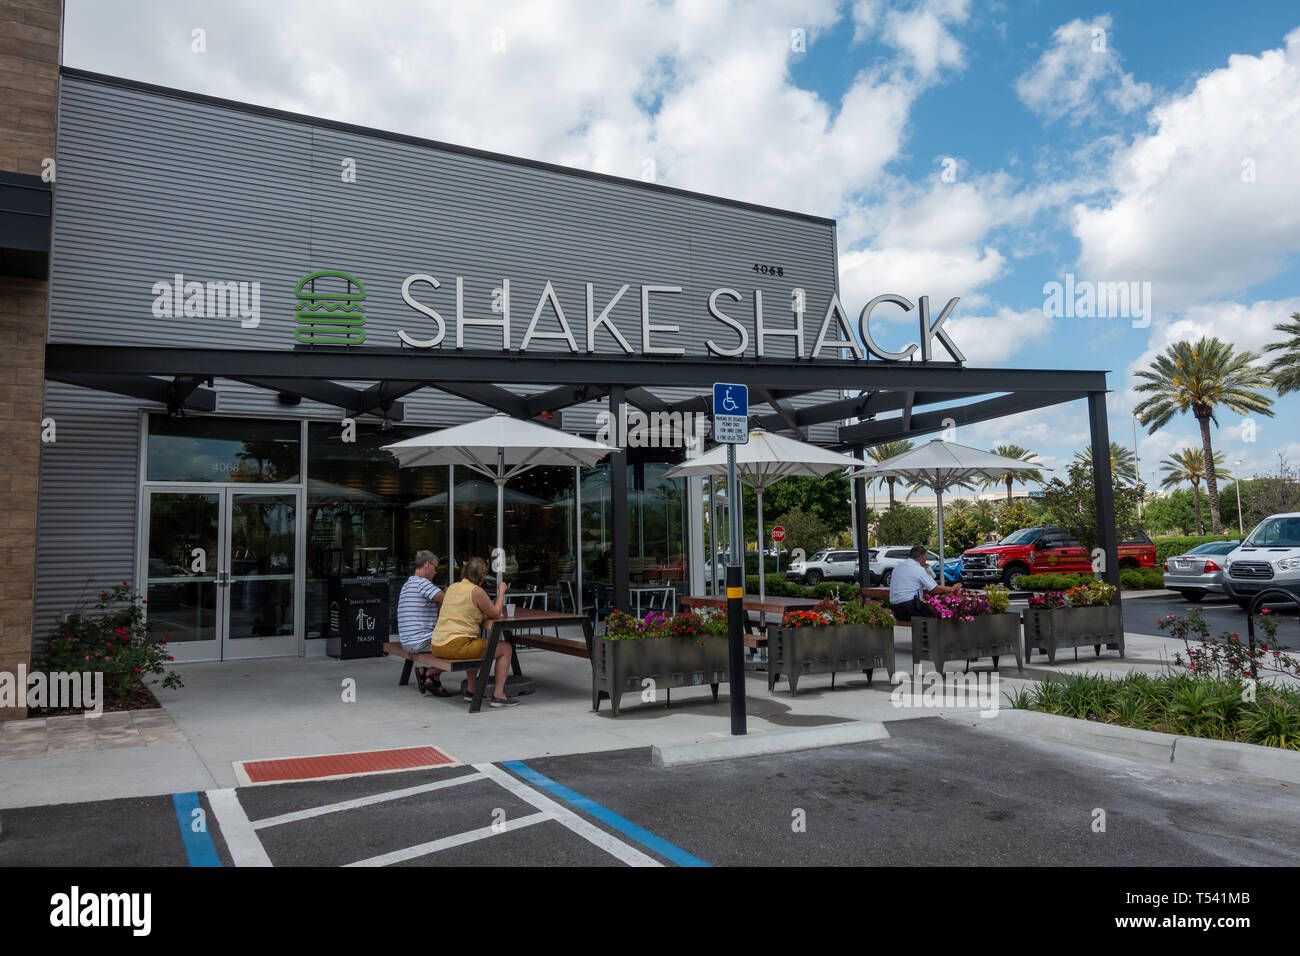 Orlando, FL/United States - 04/18/2019:Shake Shack is an American fast casual restaurant chain based in New York City that specializes in hamburgers. Stock Photo